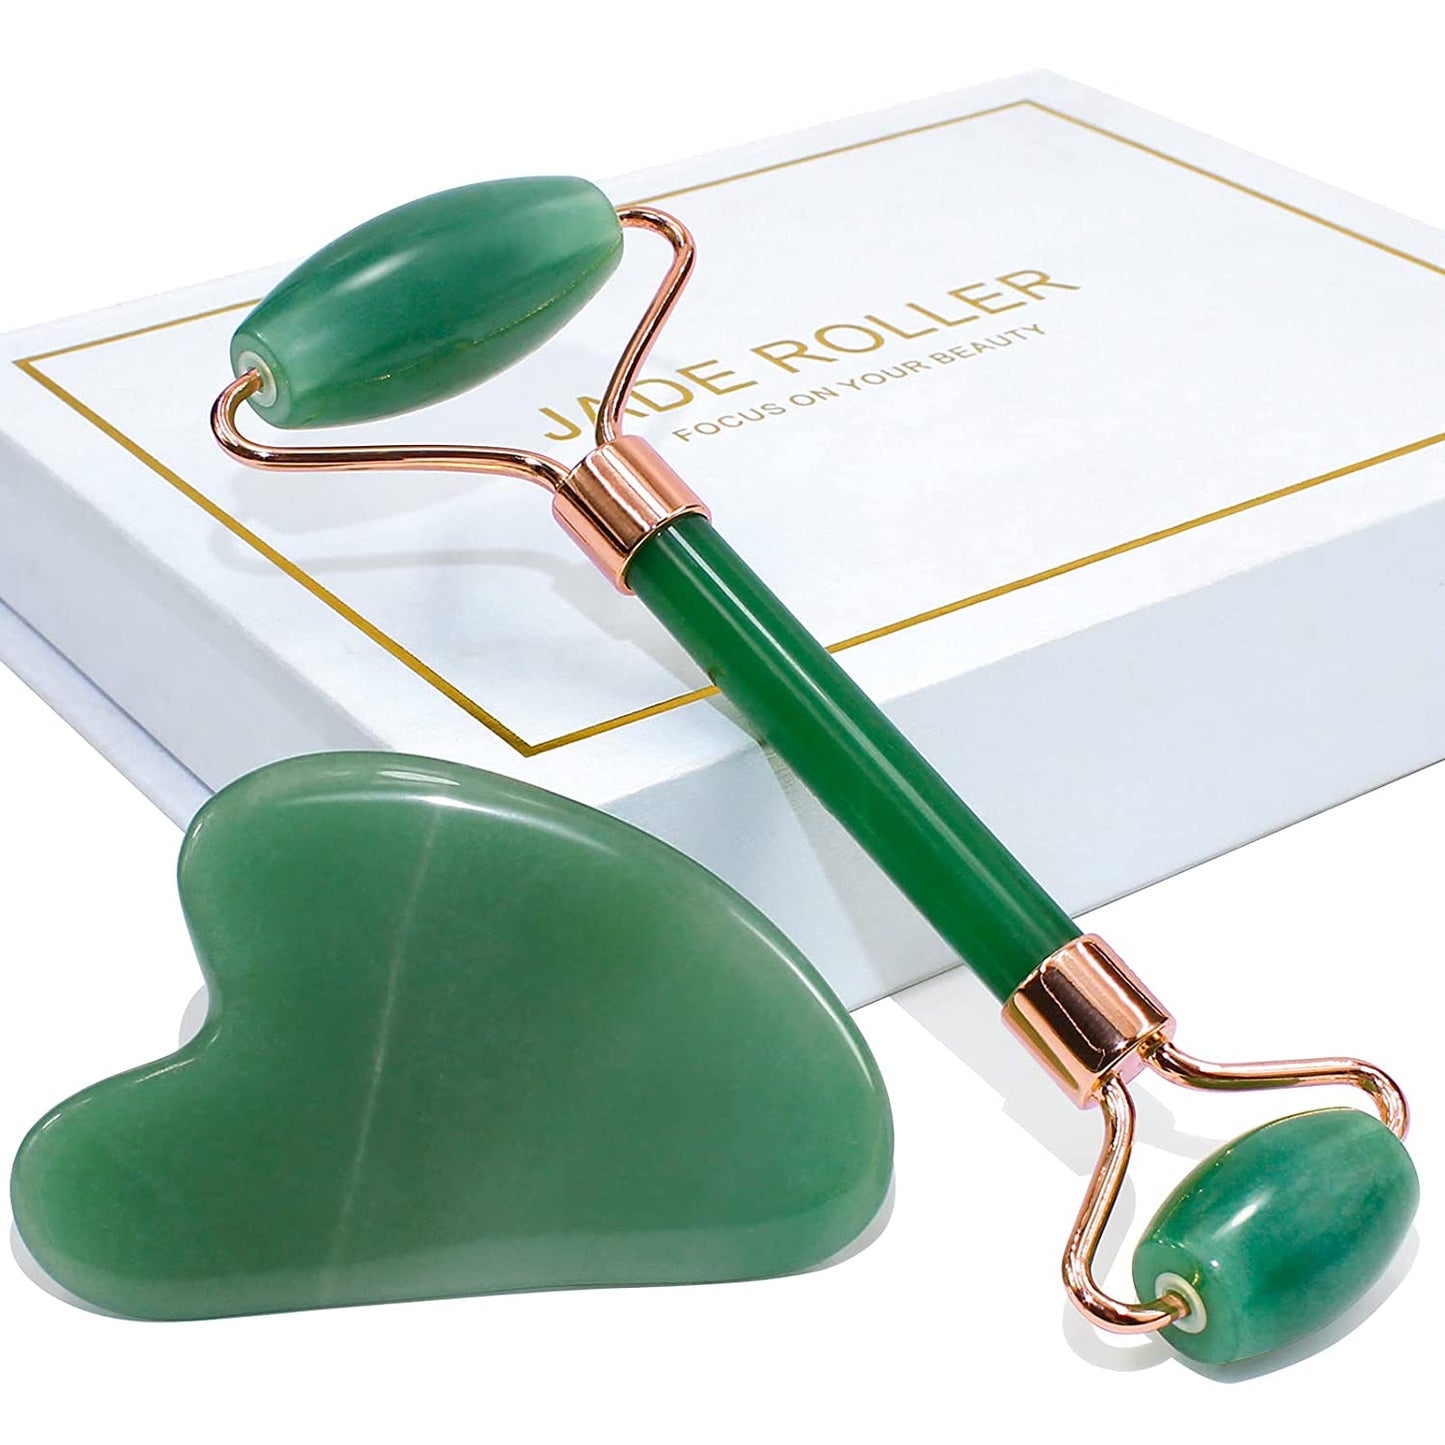 BEAKEY Jade Roller & Gua Sha Set - Face Roller Massage Tool, Green Aventurine Applicator for Face, Neck and Body Muscle - Relaxing, Relieve Fine Lines & Wrinkles - BEAKEY